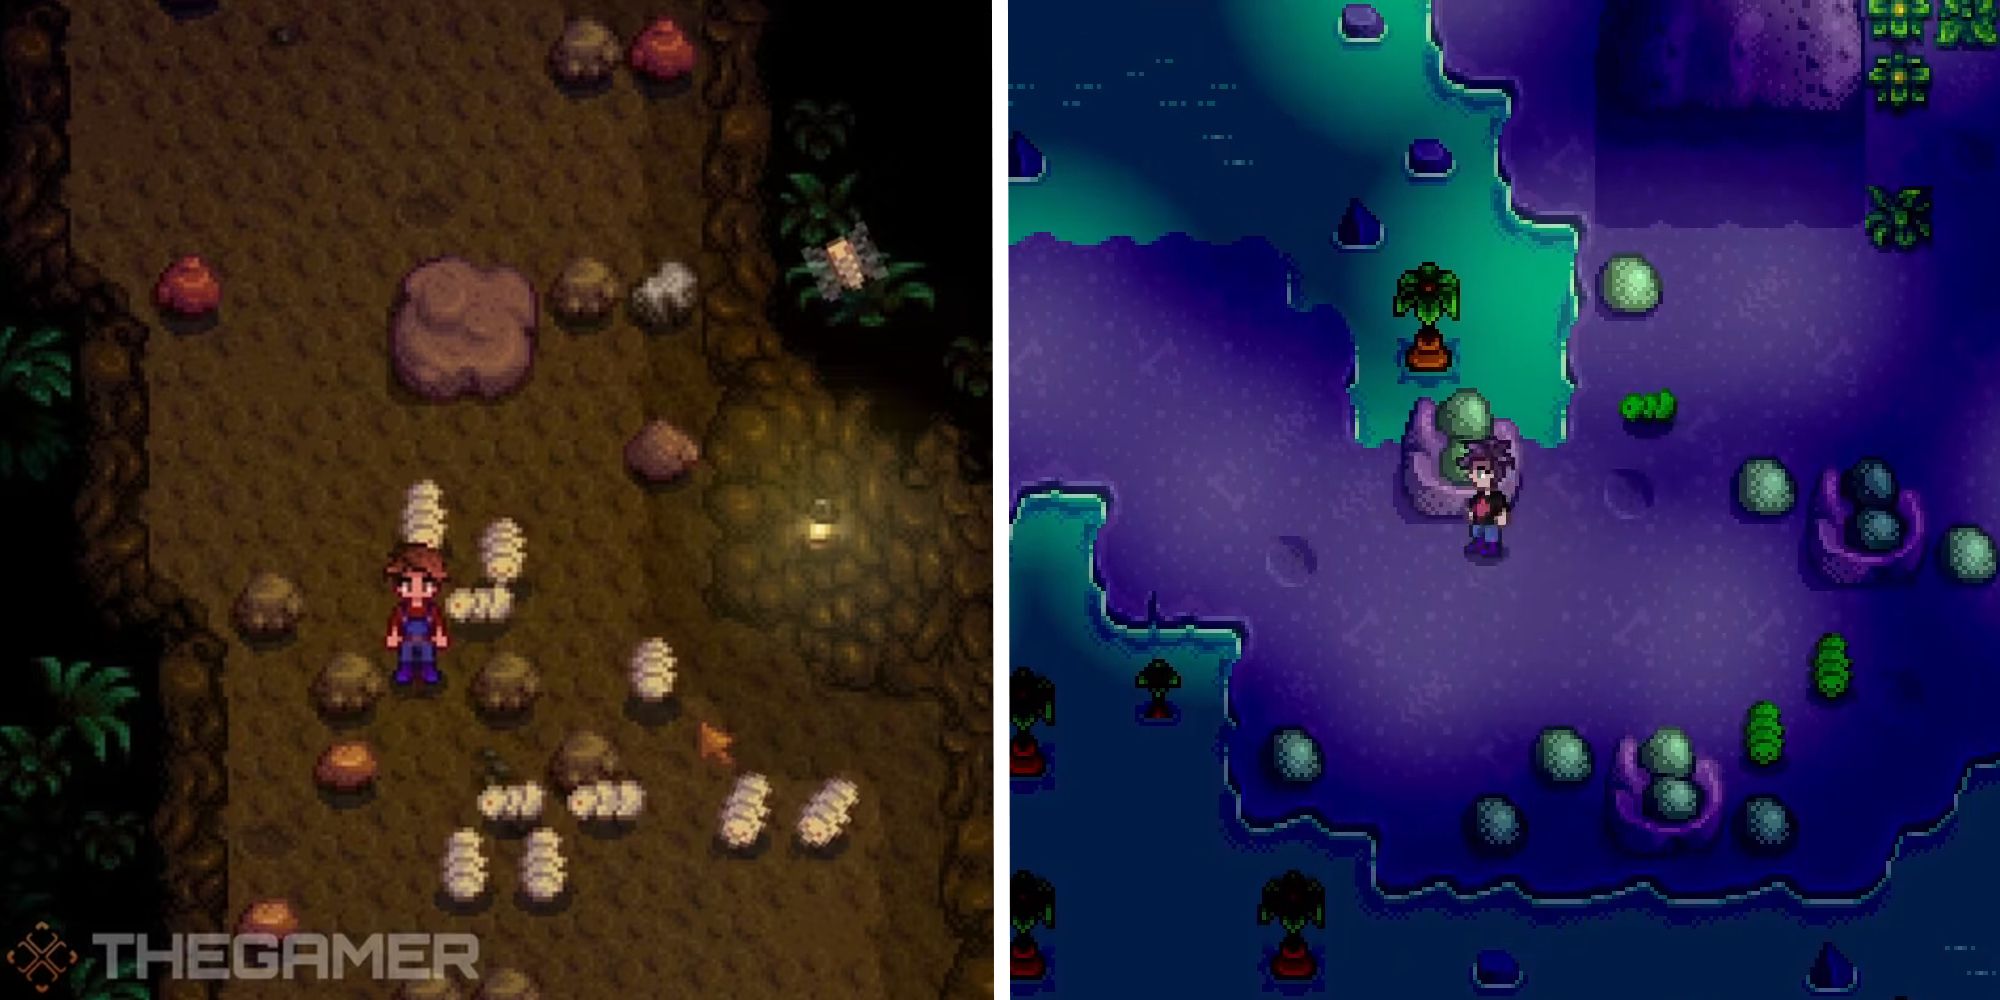 split image showing bugs in the mines and bugs in the mutant bug lair